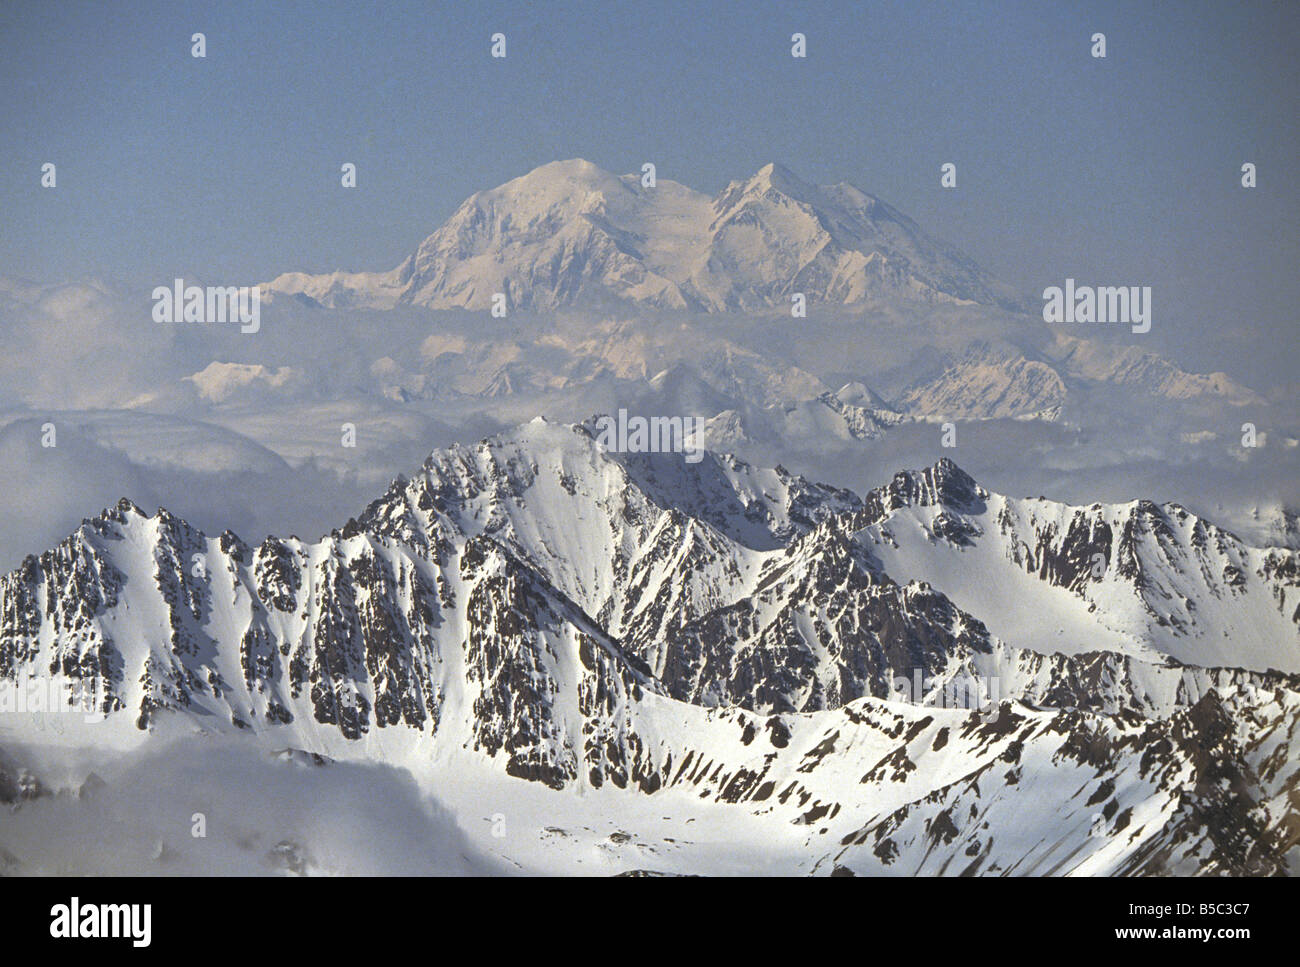 A view of massive Mount McKinley highest peak in the United States in ...